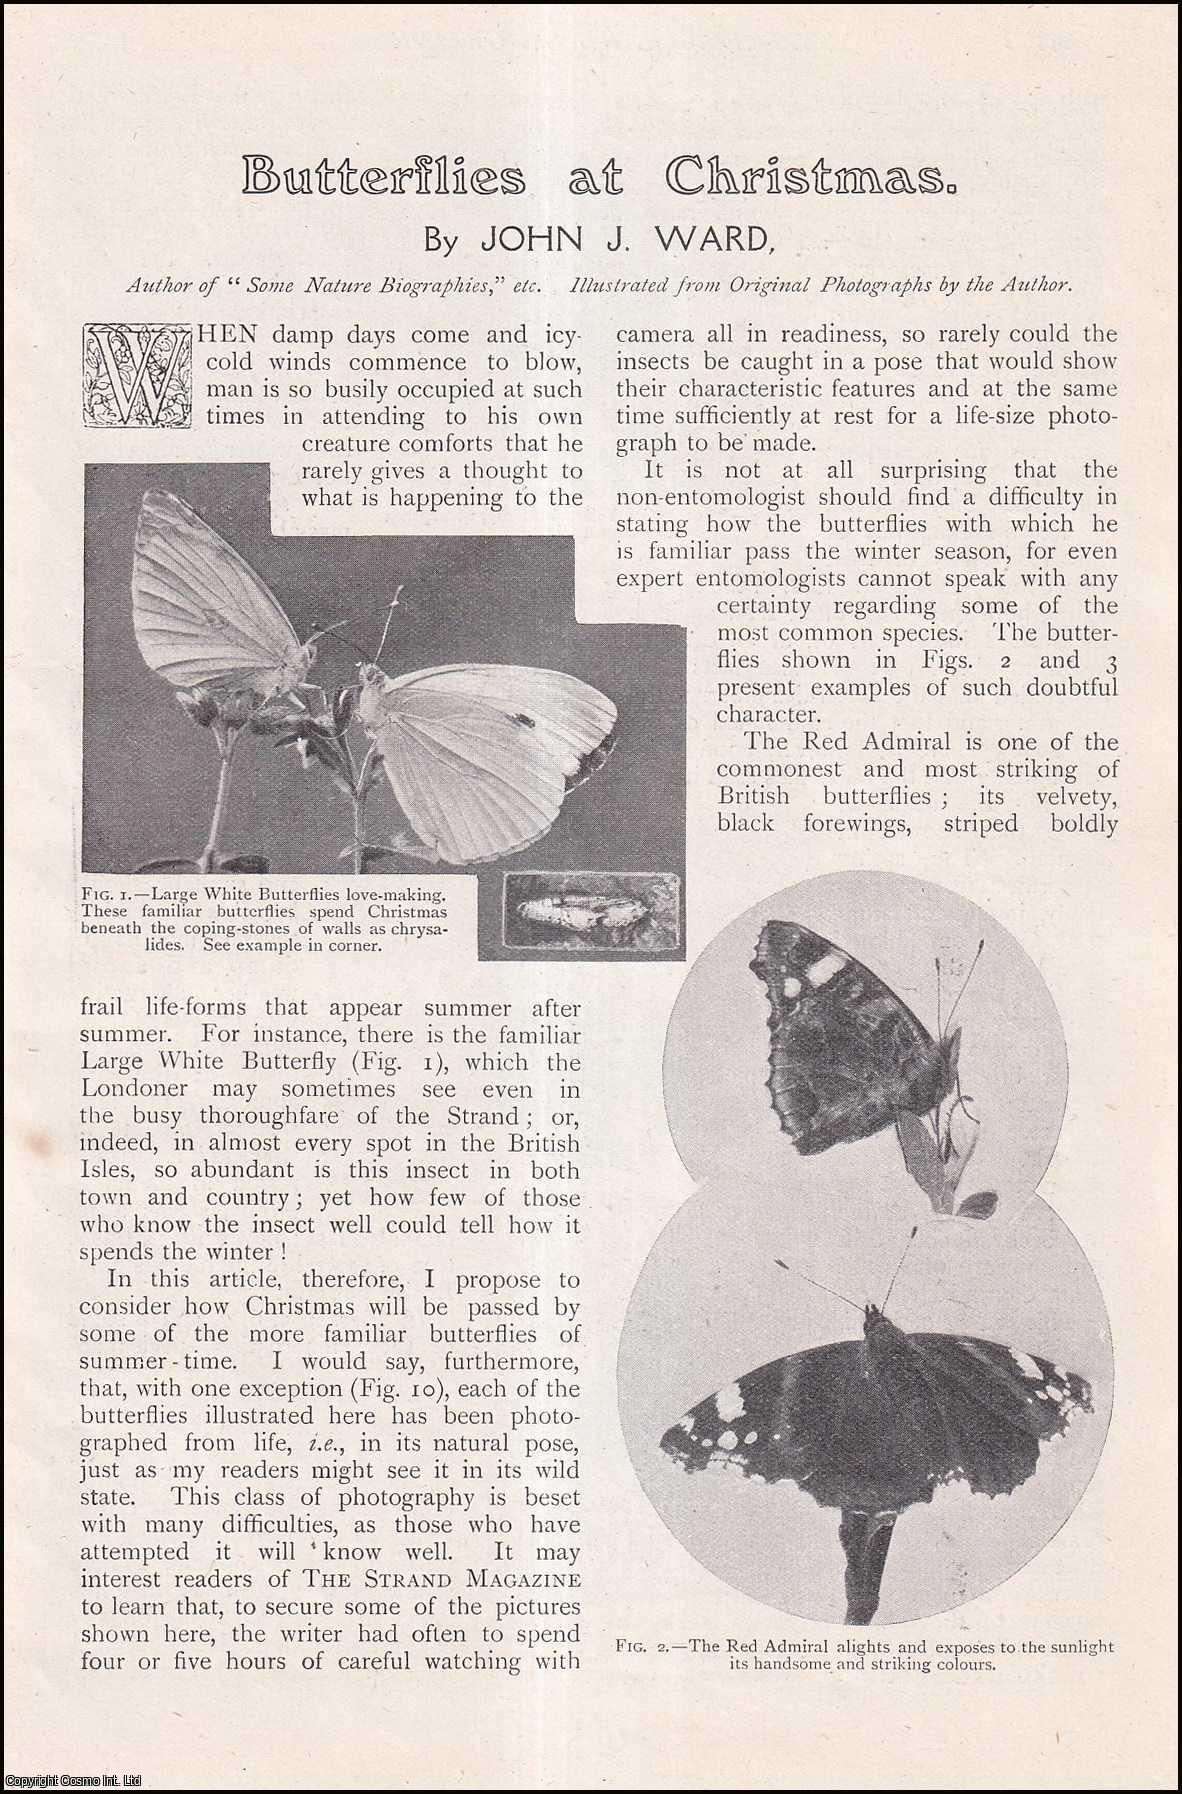 John J. Ward, Author of Some Nature Biographies, etc. - Butterflies at Christmas. An uncommon original article from The Strand Magazine, 1908.